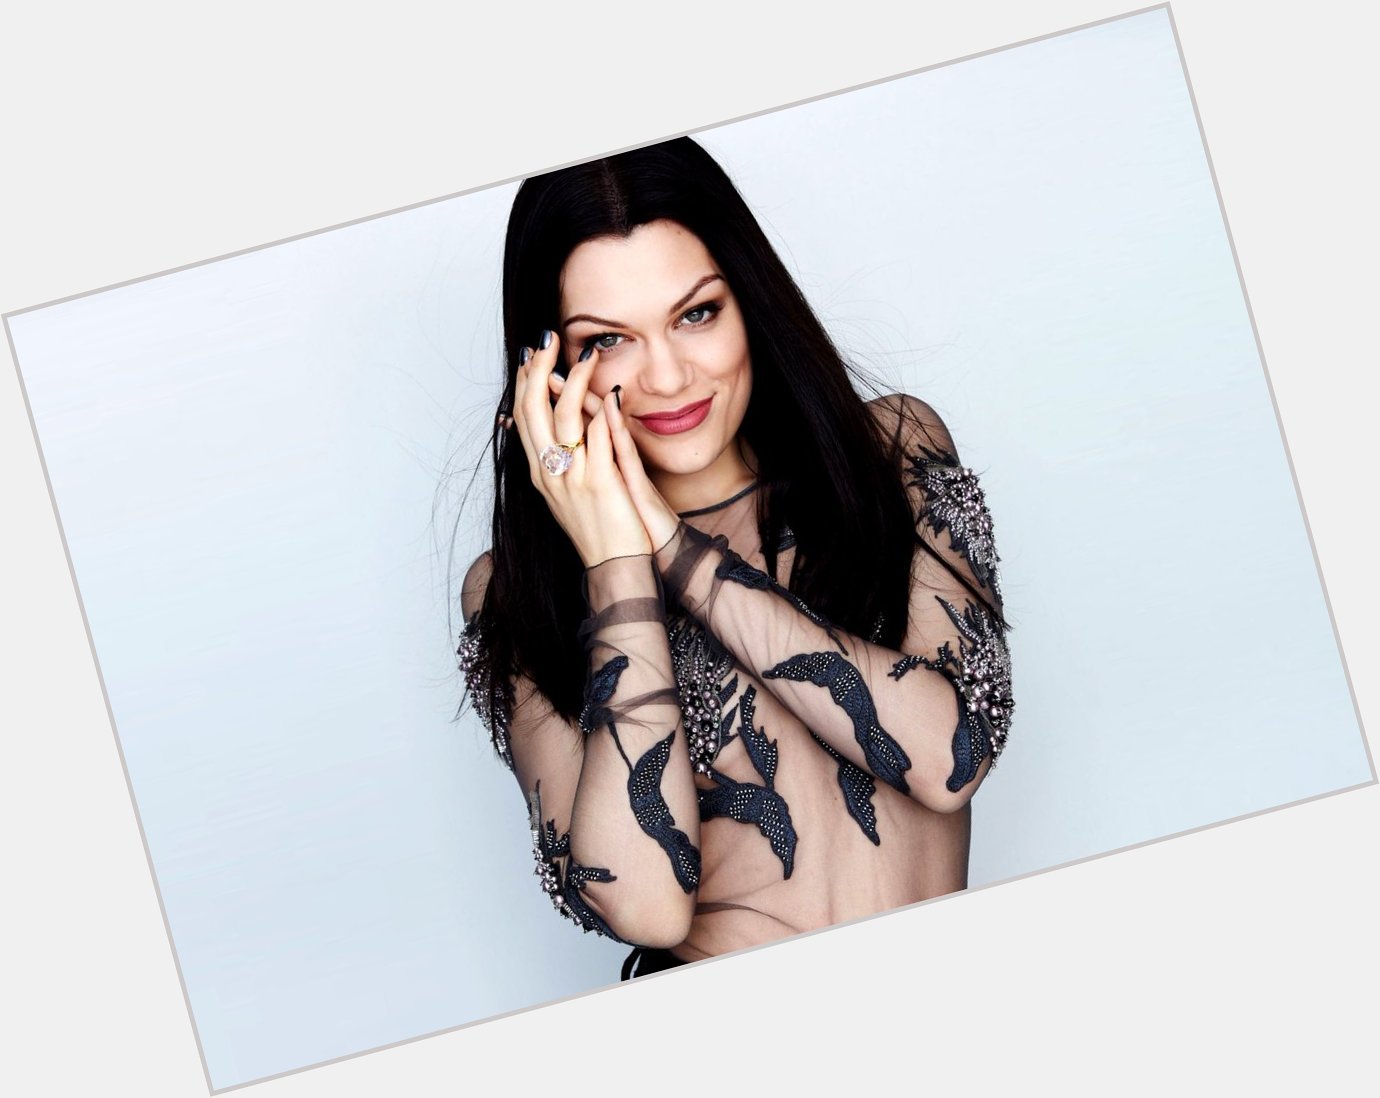 PopCrave: Happy birthday to the beautiful and talented Jessie J. The Grammy nominated UK songstress turns 29 to 